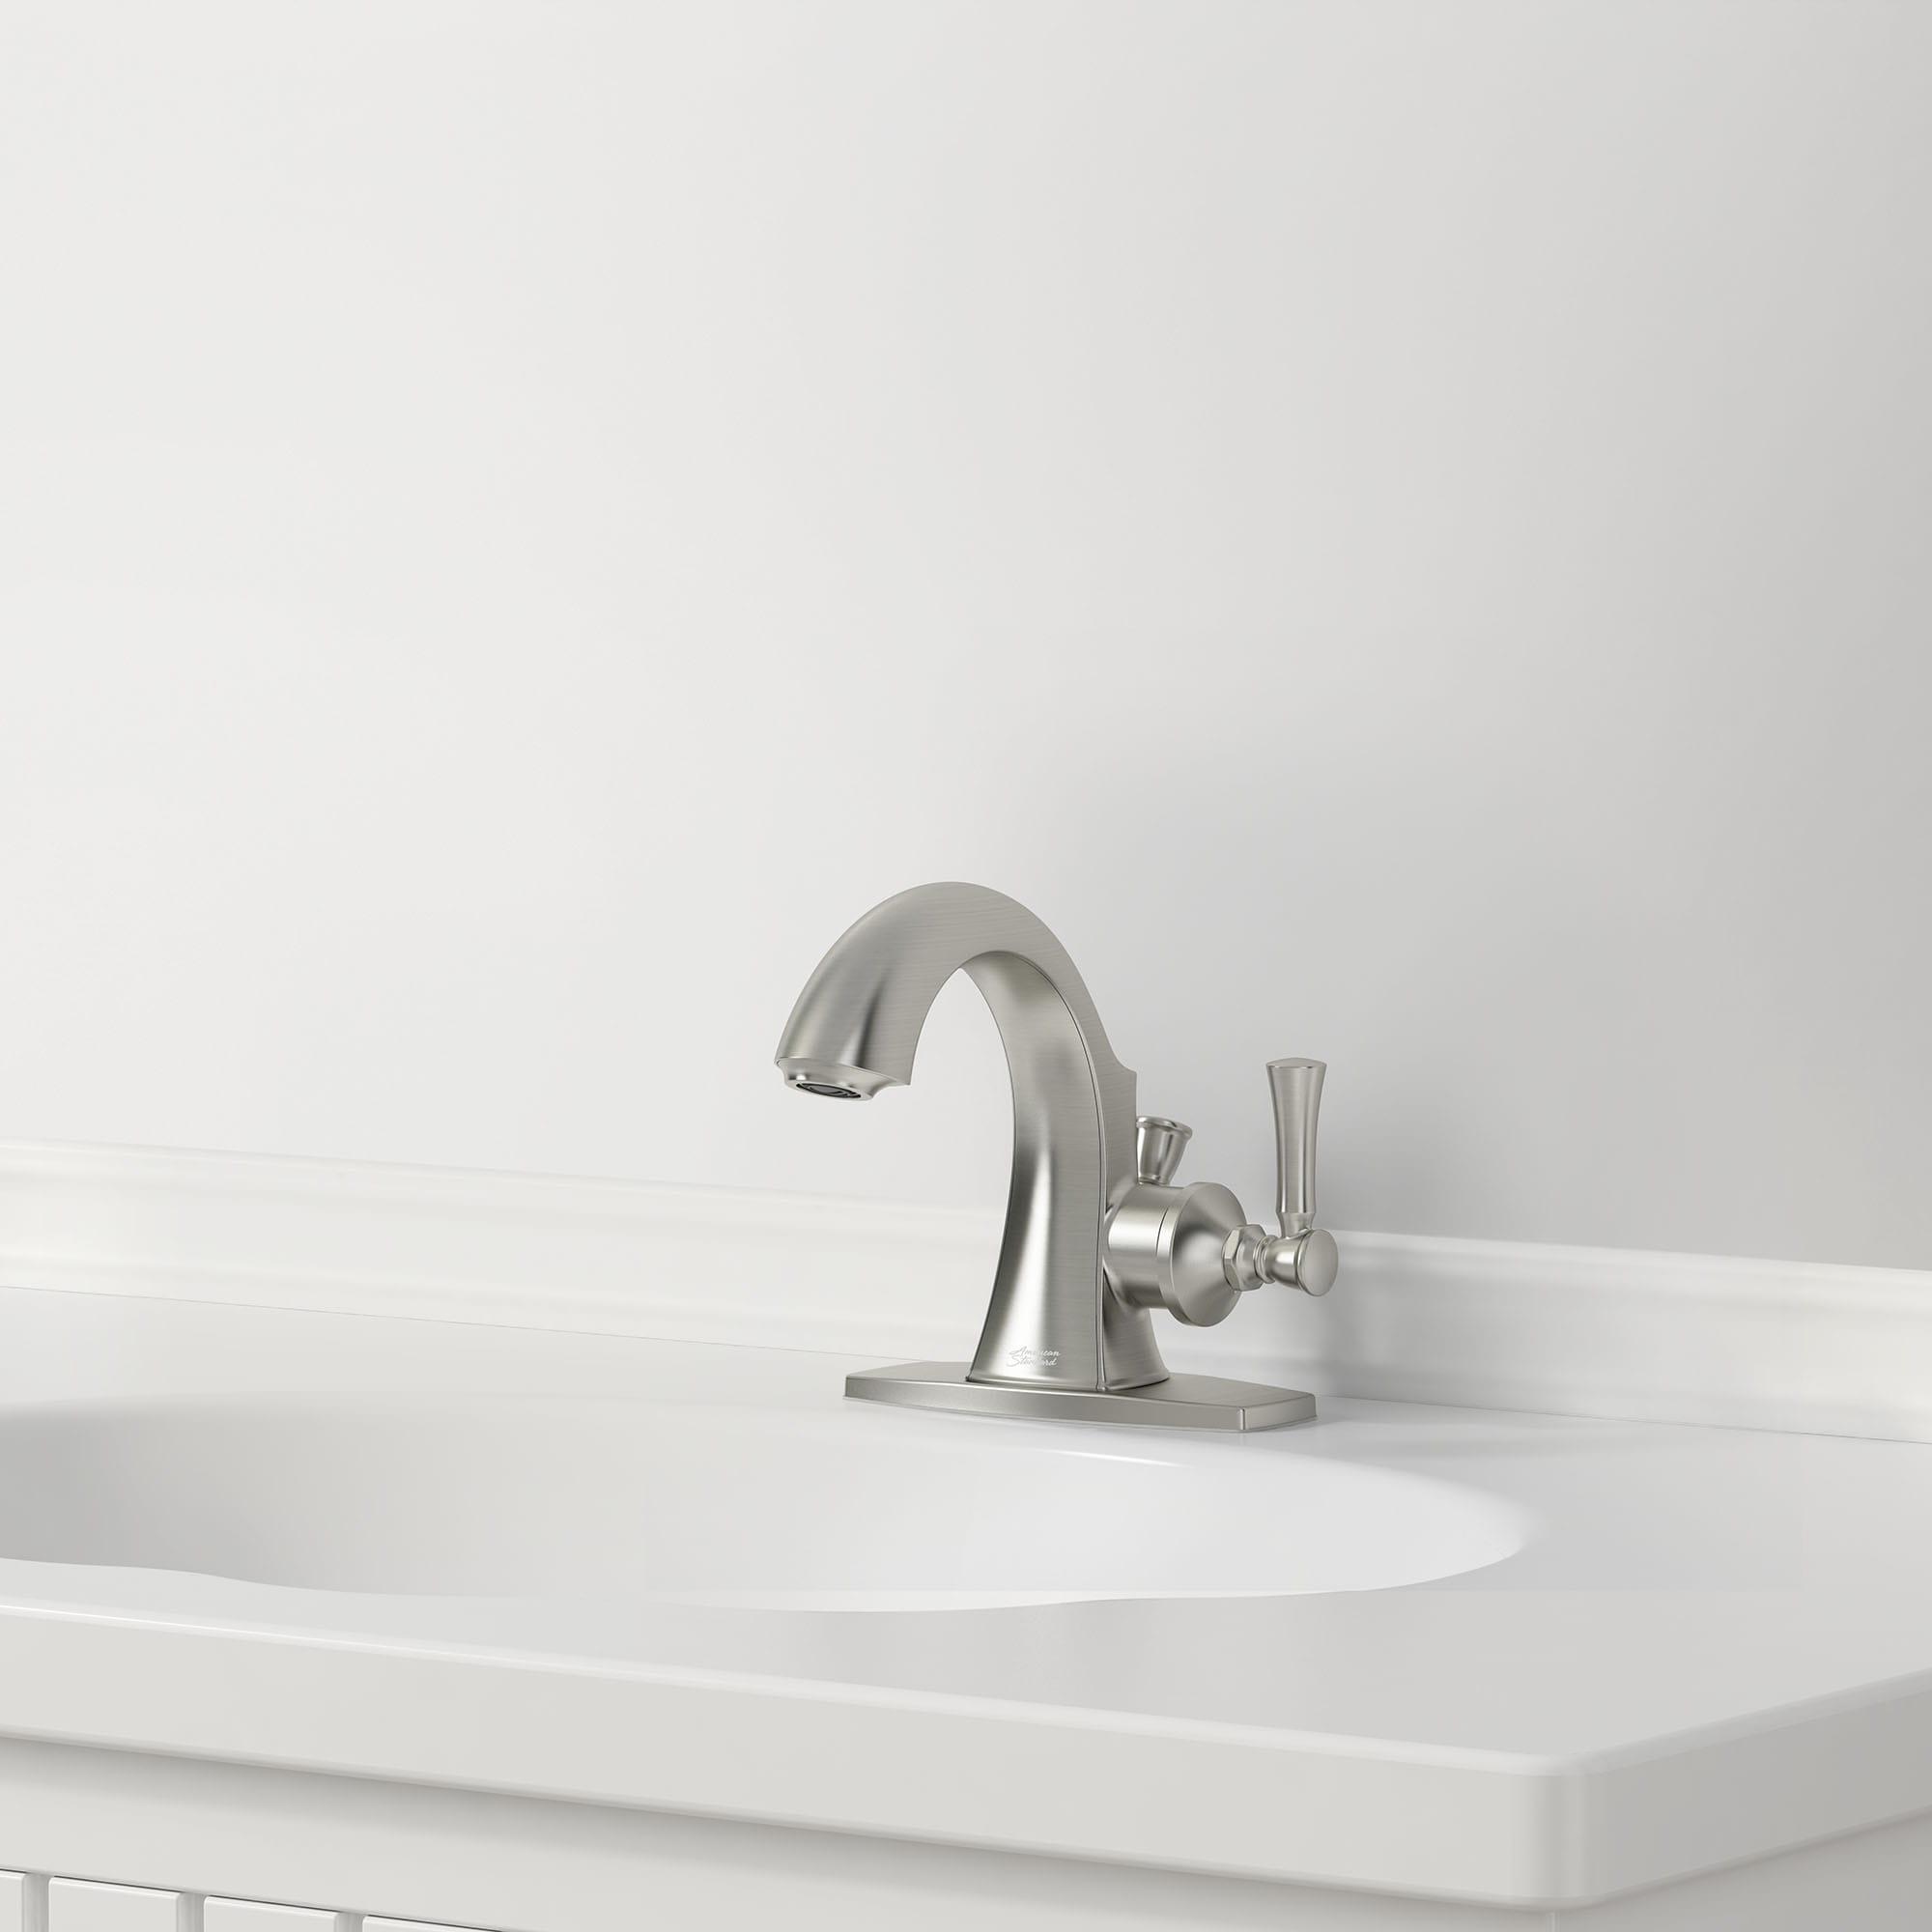 Chancellor 4-In. Centerset Single-Handle  Bathroom Faucet 1.2 GPM with Lever Handle